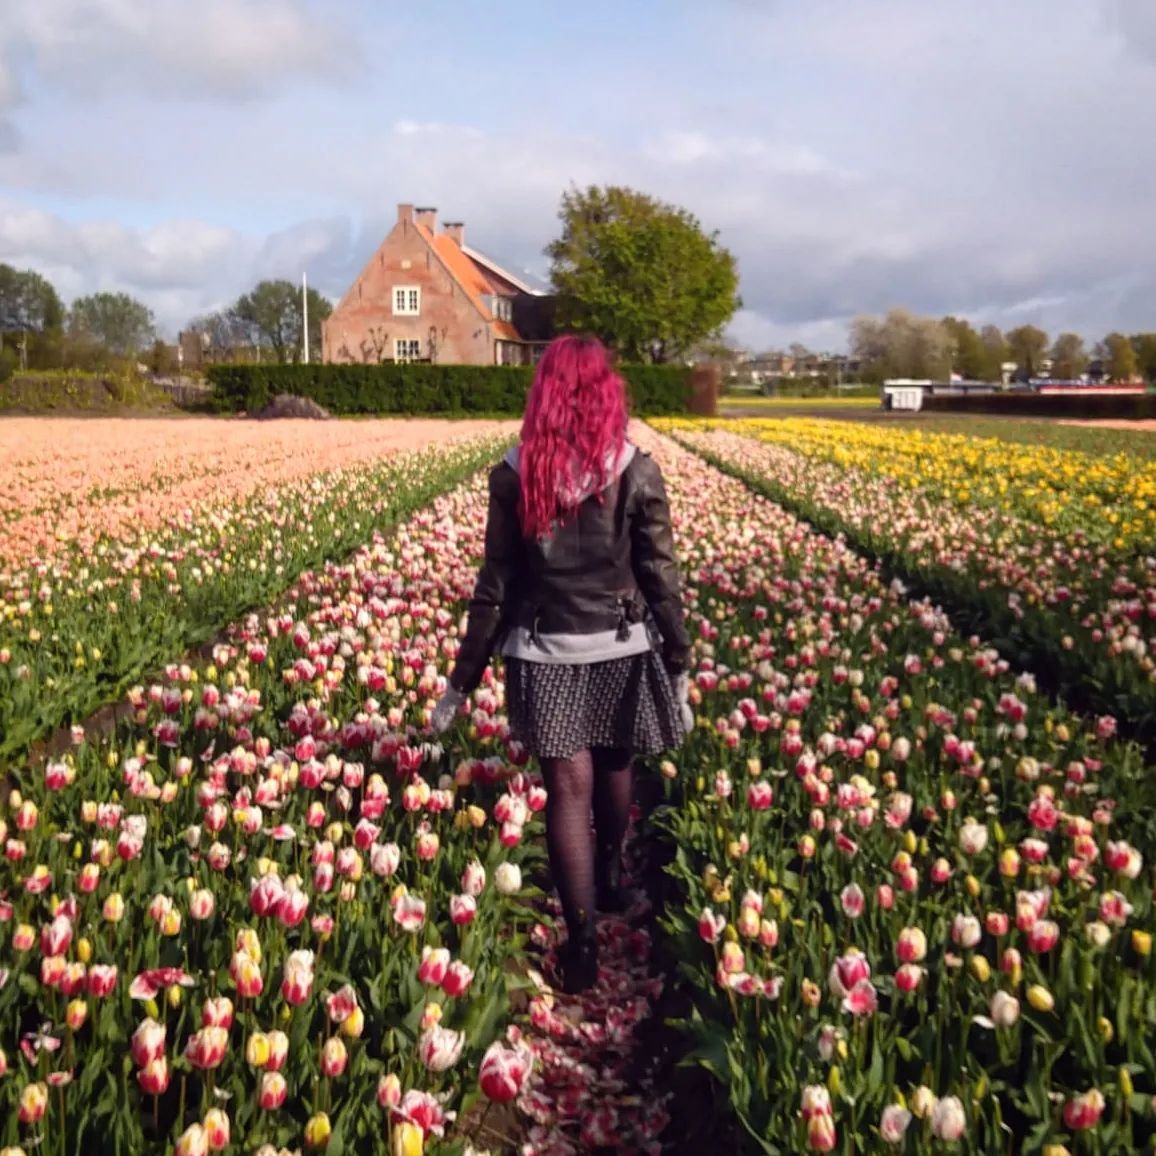 Had a lush weekend in visiting my sister in the Netherlands. I just had to squeeze a tulip trip in! 🌷 

#tulips #tulip #tulipfields #keukenhof #Holland #travel #florist #floristry #flowers #beautifulflowers #travellingflorist #travel #seetheworld #b